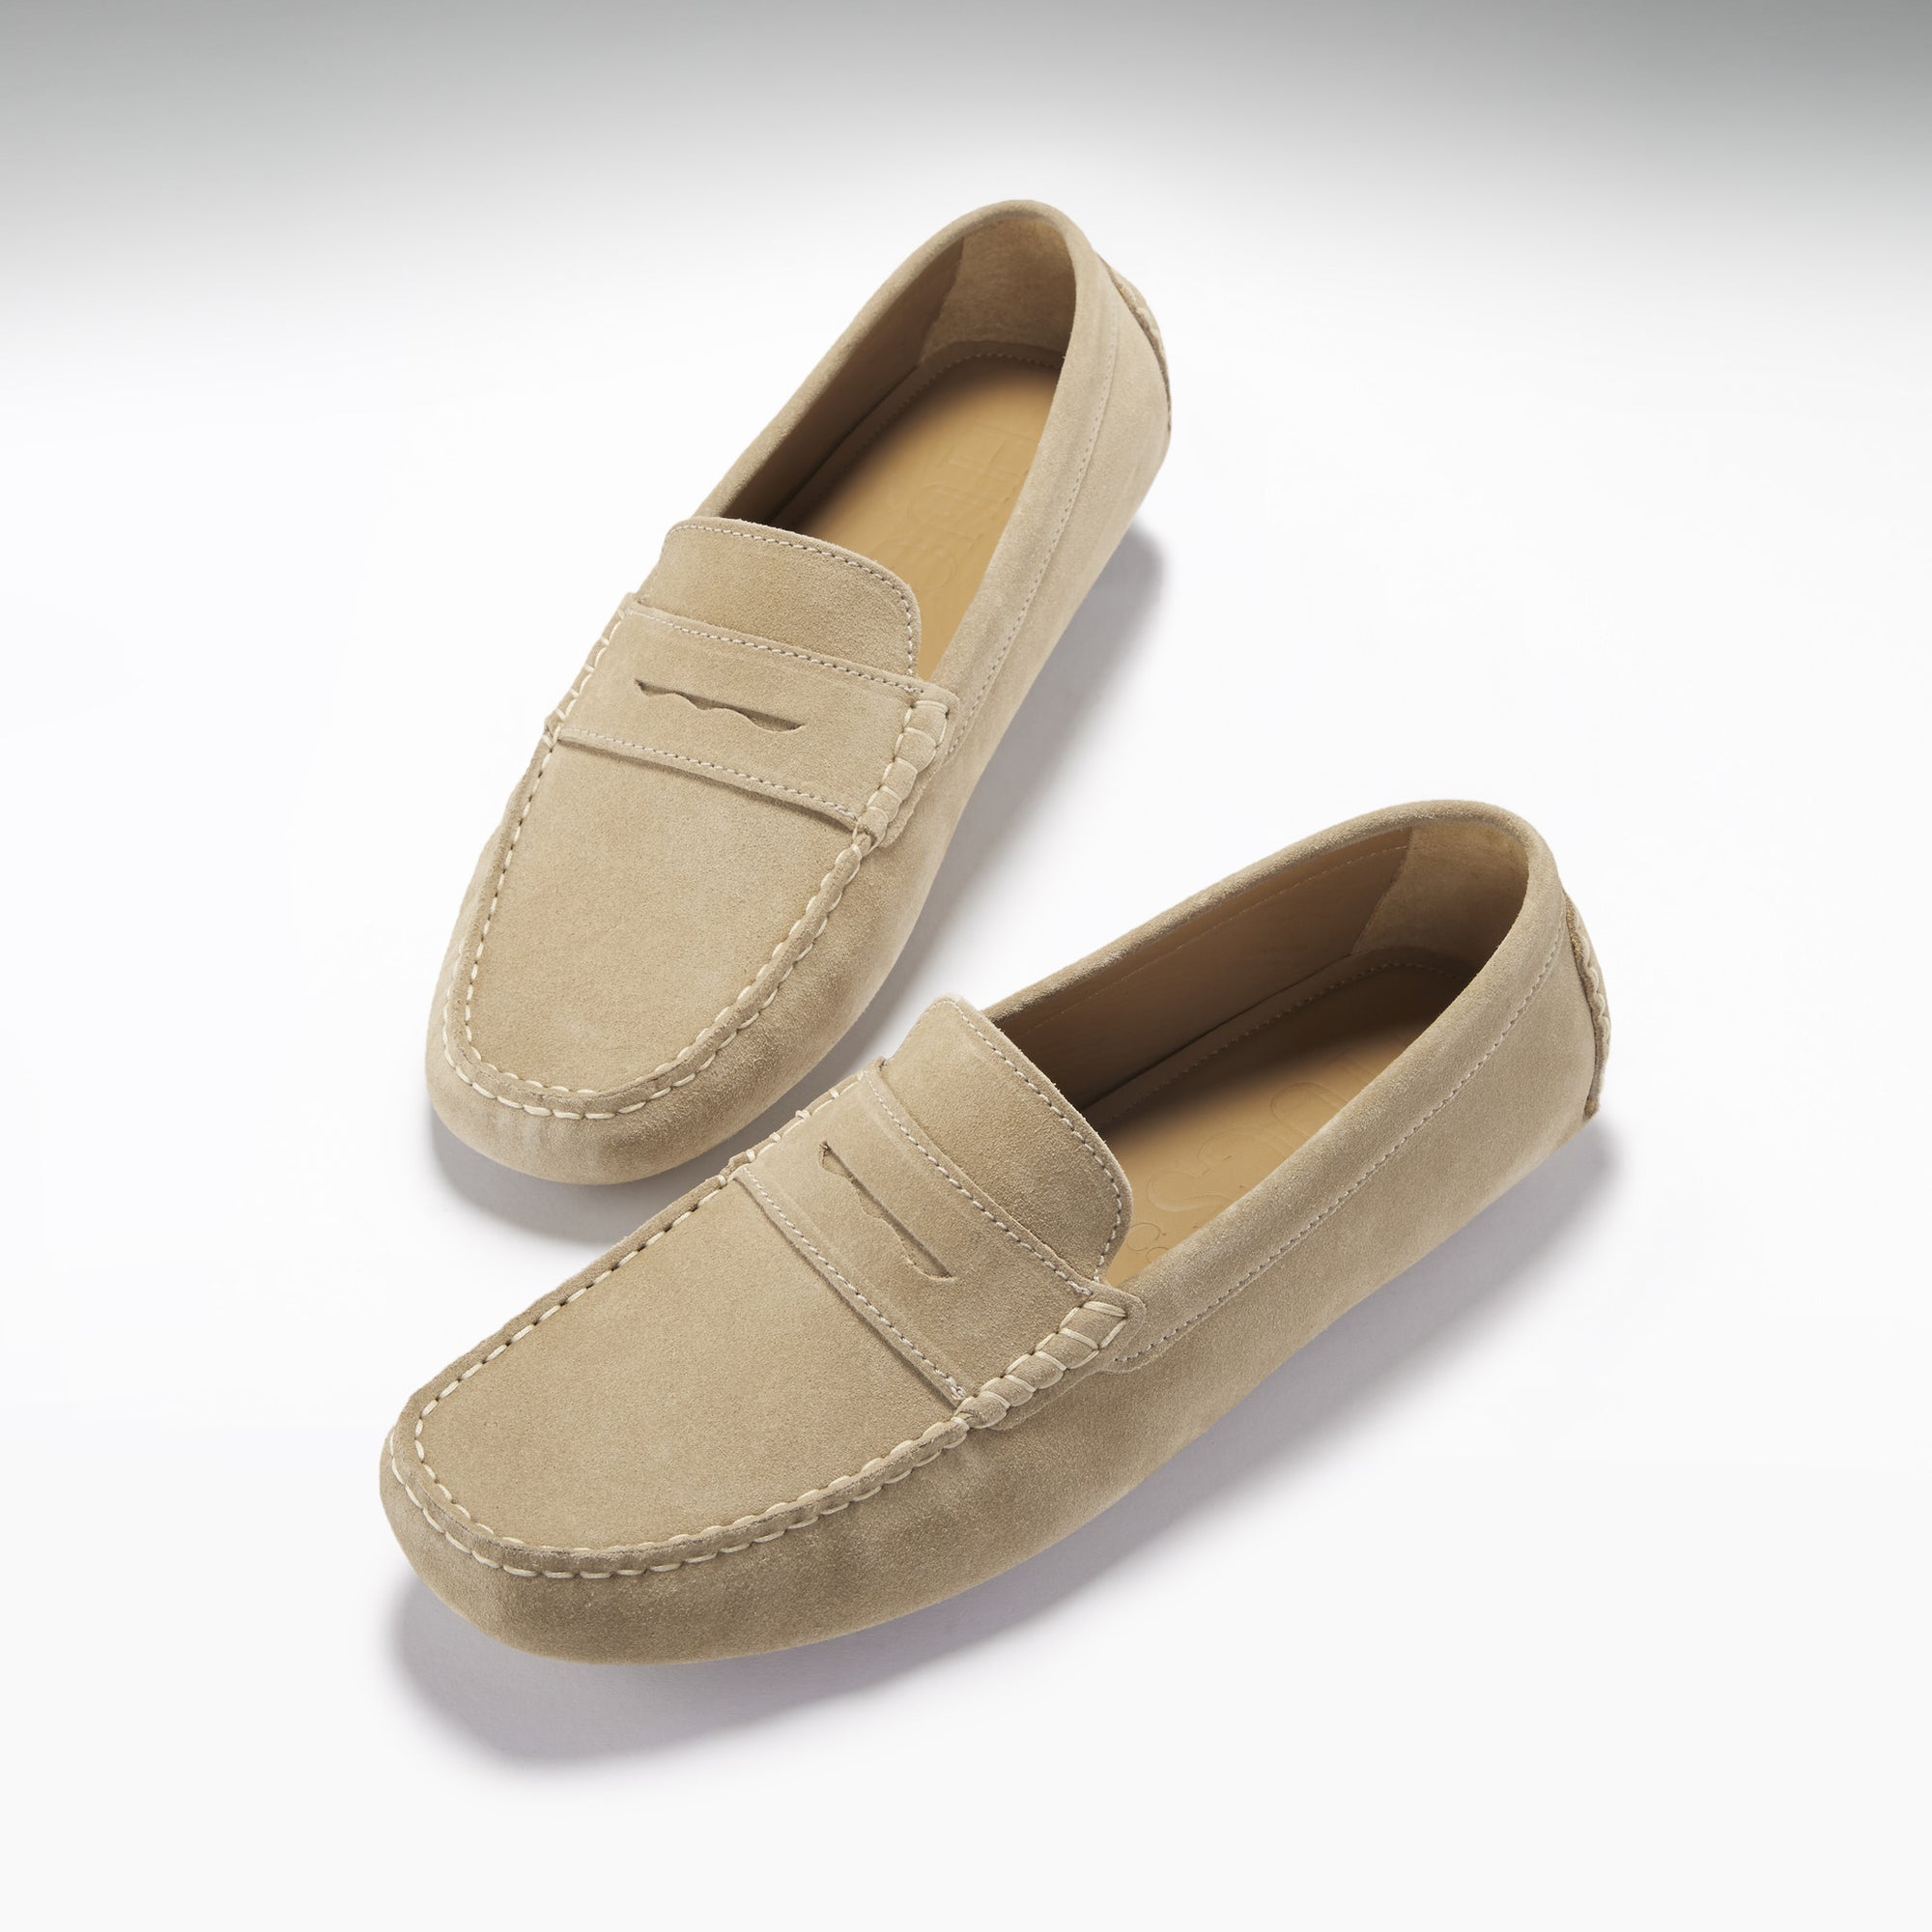 Penny Driving Loafers, taupe suede